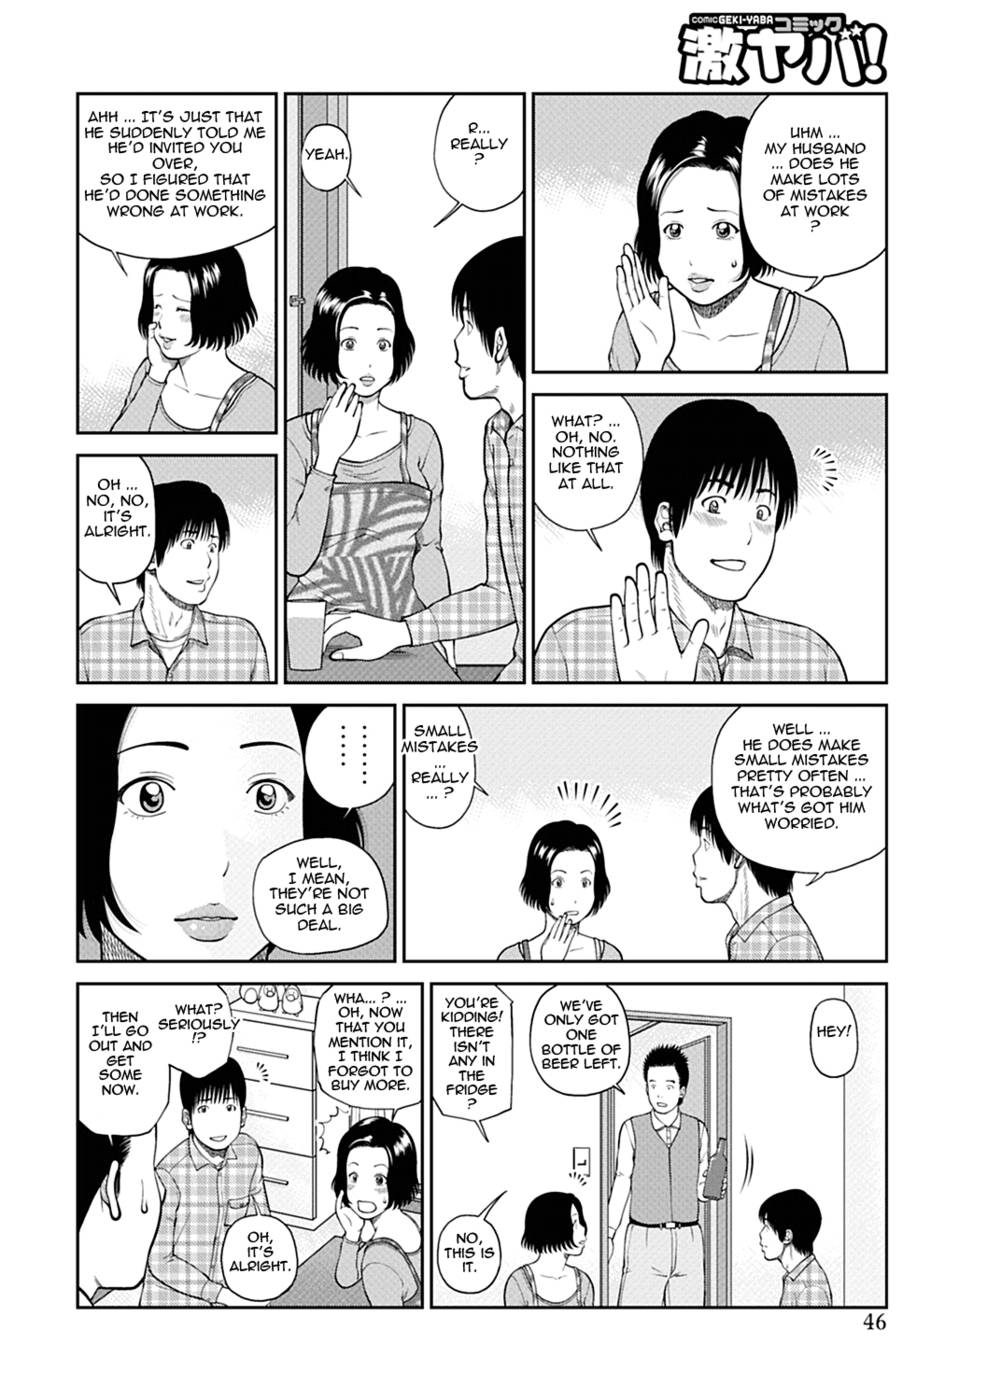 Hentai Manga Comic-34 Year Old Unsatisfied Wife-Chapter 3-Entertaining Wife-First Half-4